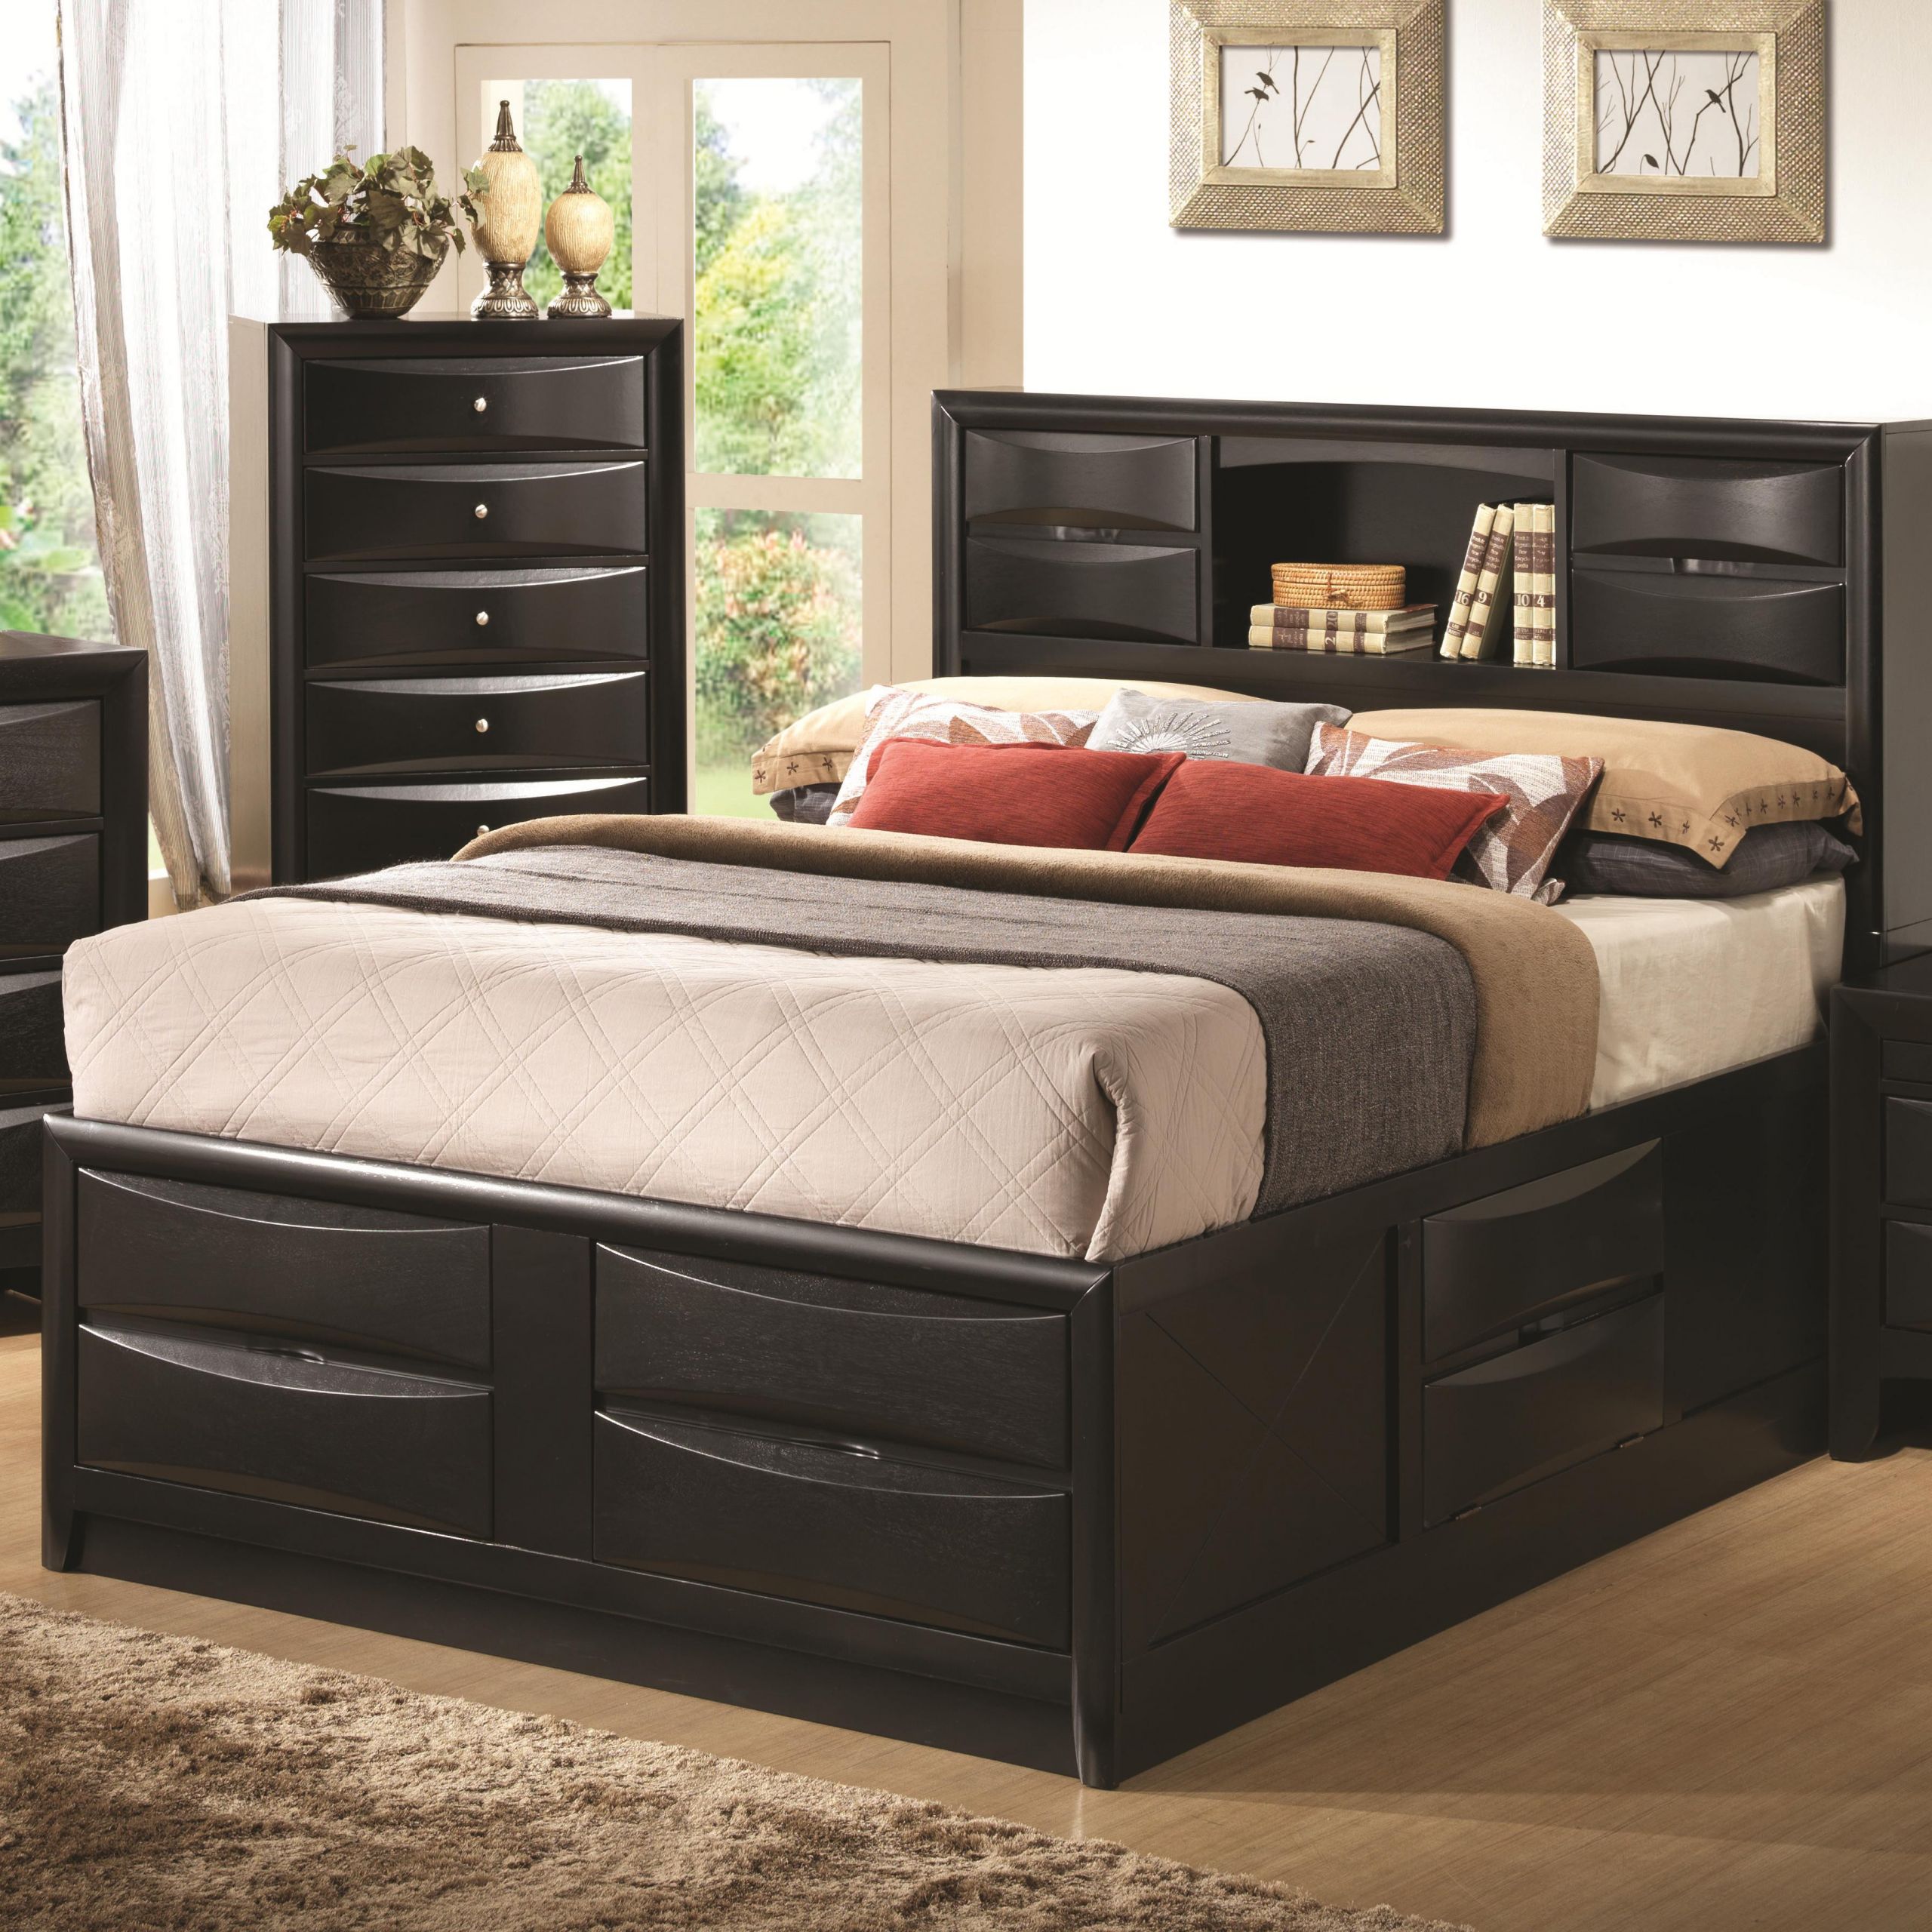 Full Size Storage Bedroom Sets
 Coaster Briana KE King Contemporary Storage Bed with